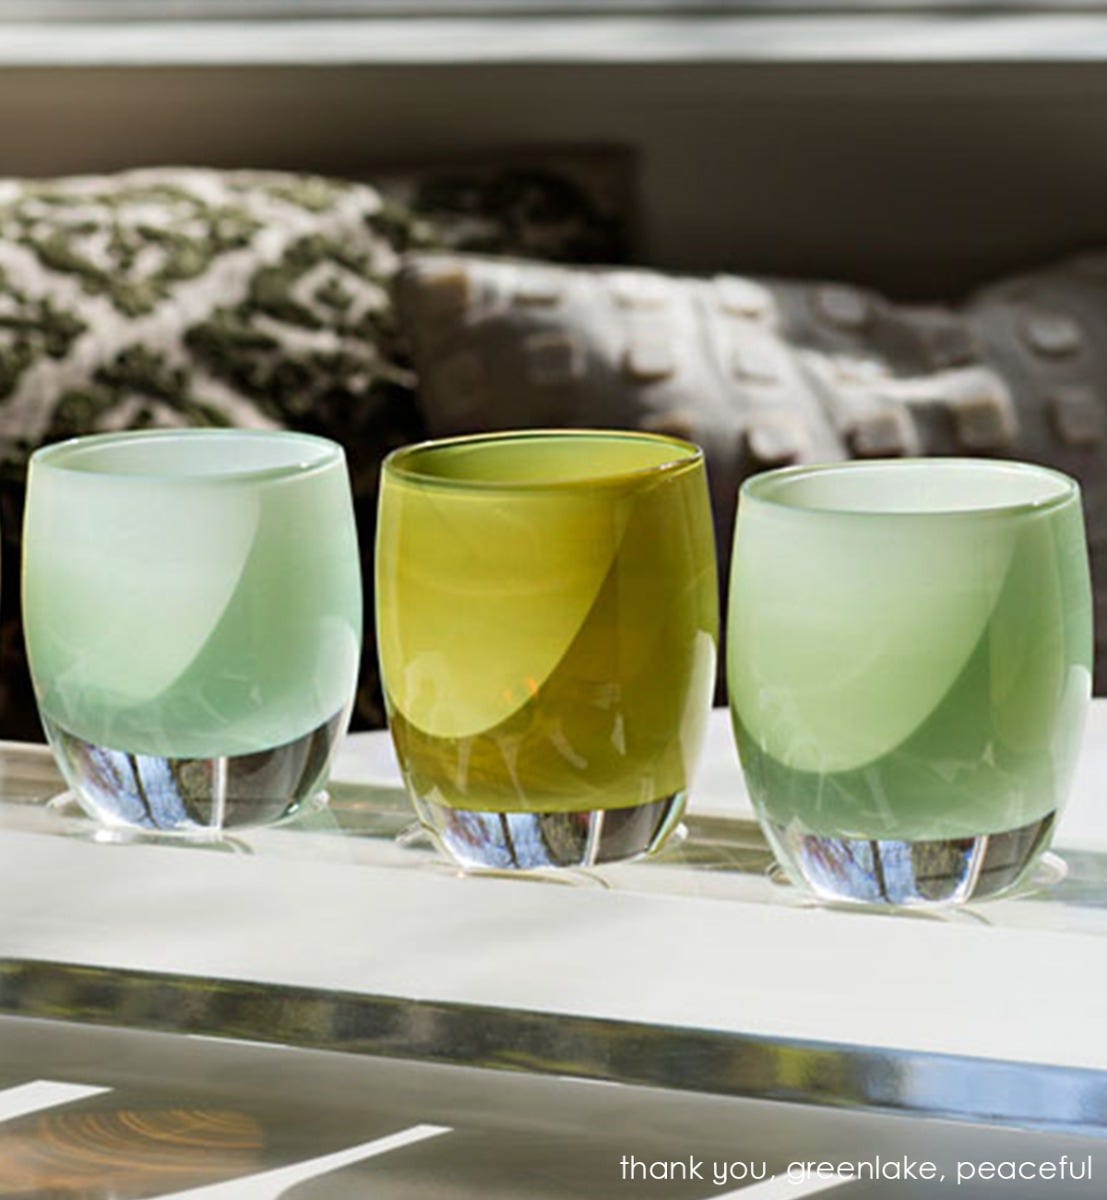 greenlake olive green hand-blown glass votive candle holder. Paired with thank you and peaceful.